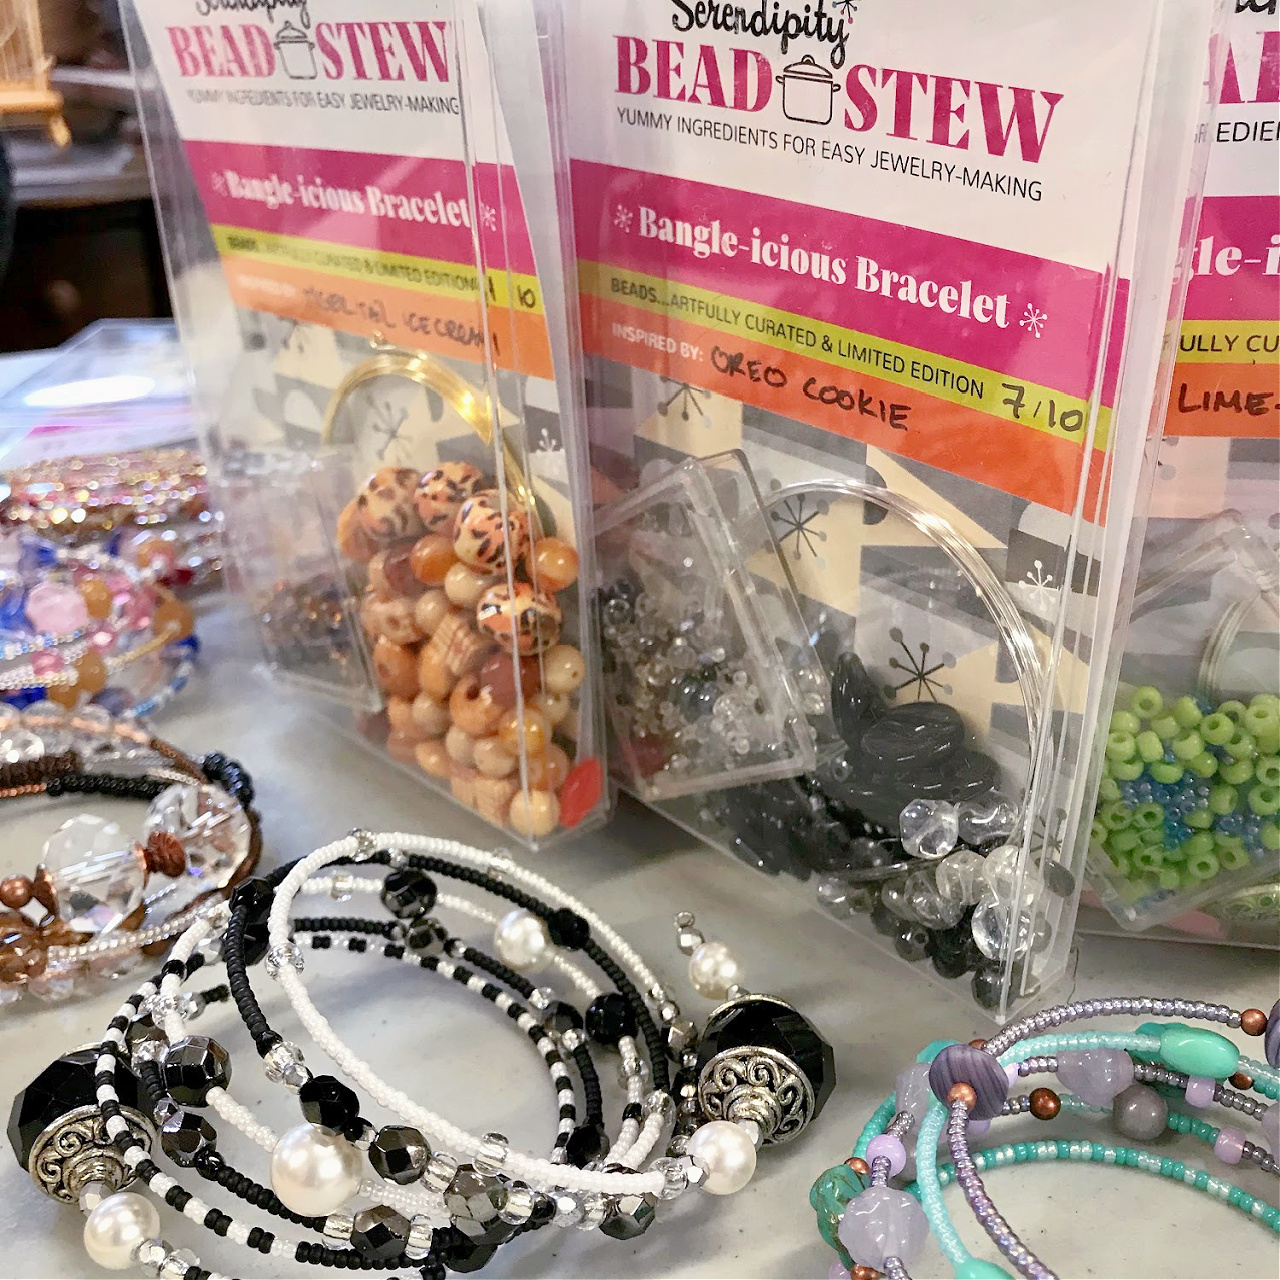 A variety of Bead Stew jewelry making kits to choose from.